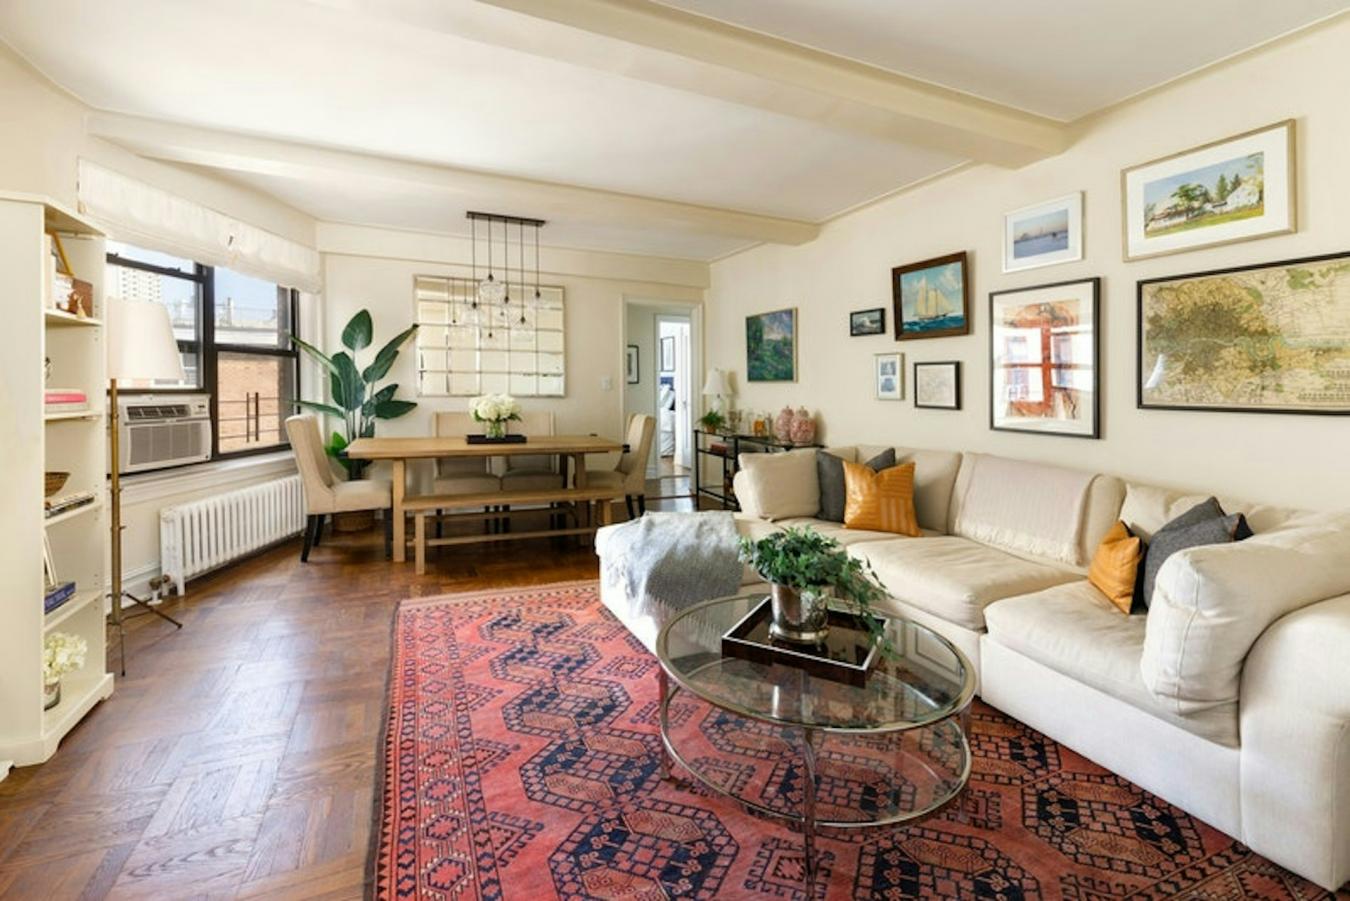 35 WEST 92ND STREET, New York, New York, 10025, United States, 2 Bedrooms Bedrooms, ,2 BathroomsBathrooms,Residential,For Sale,35 west 92nd ST,1493848